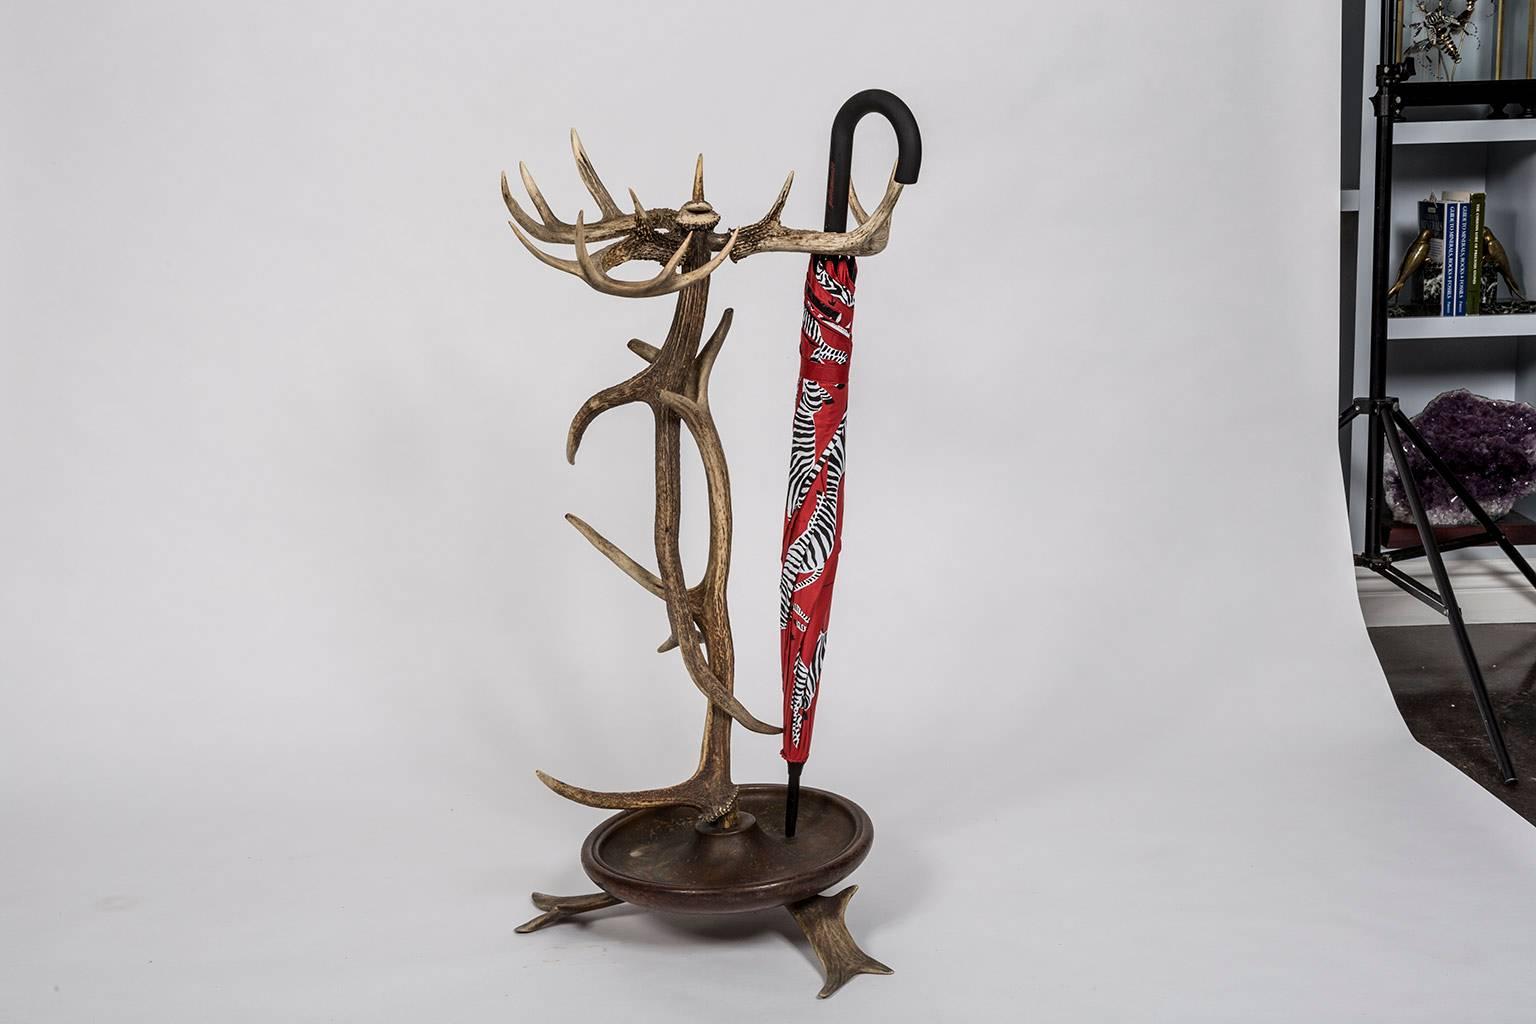 Black Forest style Antler umbrella stand from a 1920s Adirondack Great Camp. The antlers are sturdily affixed to a metal lined wooden drip tray supported by three splayed antlers. This beautiful sculptural item from Mother Nature is not only